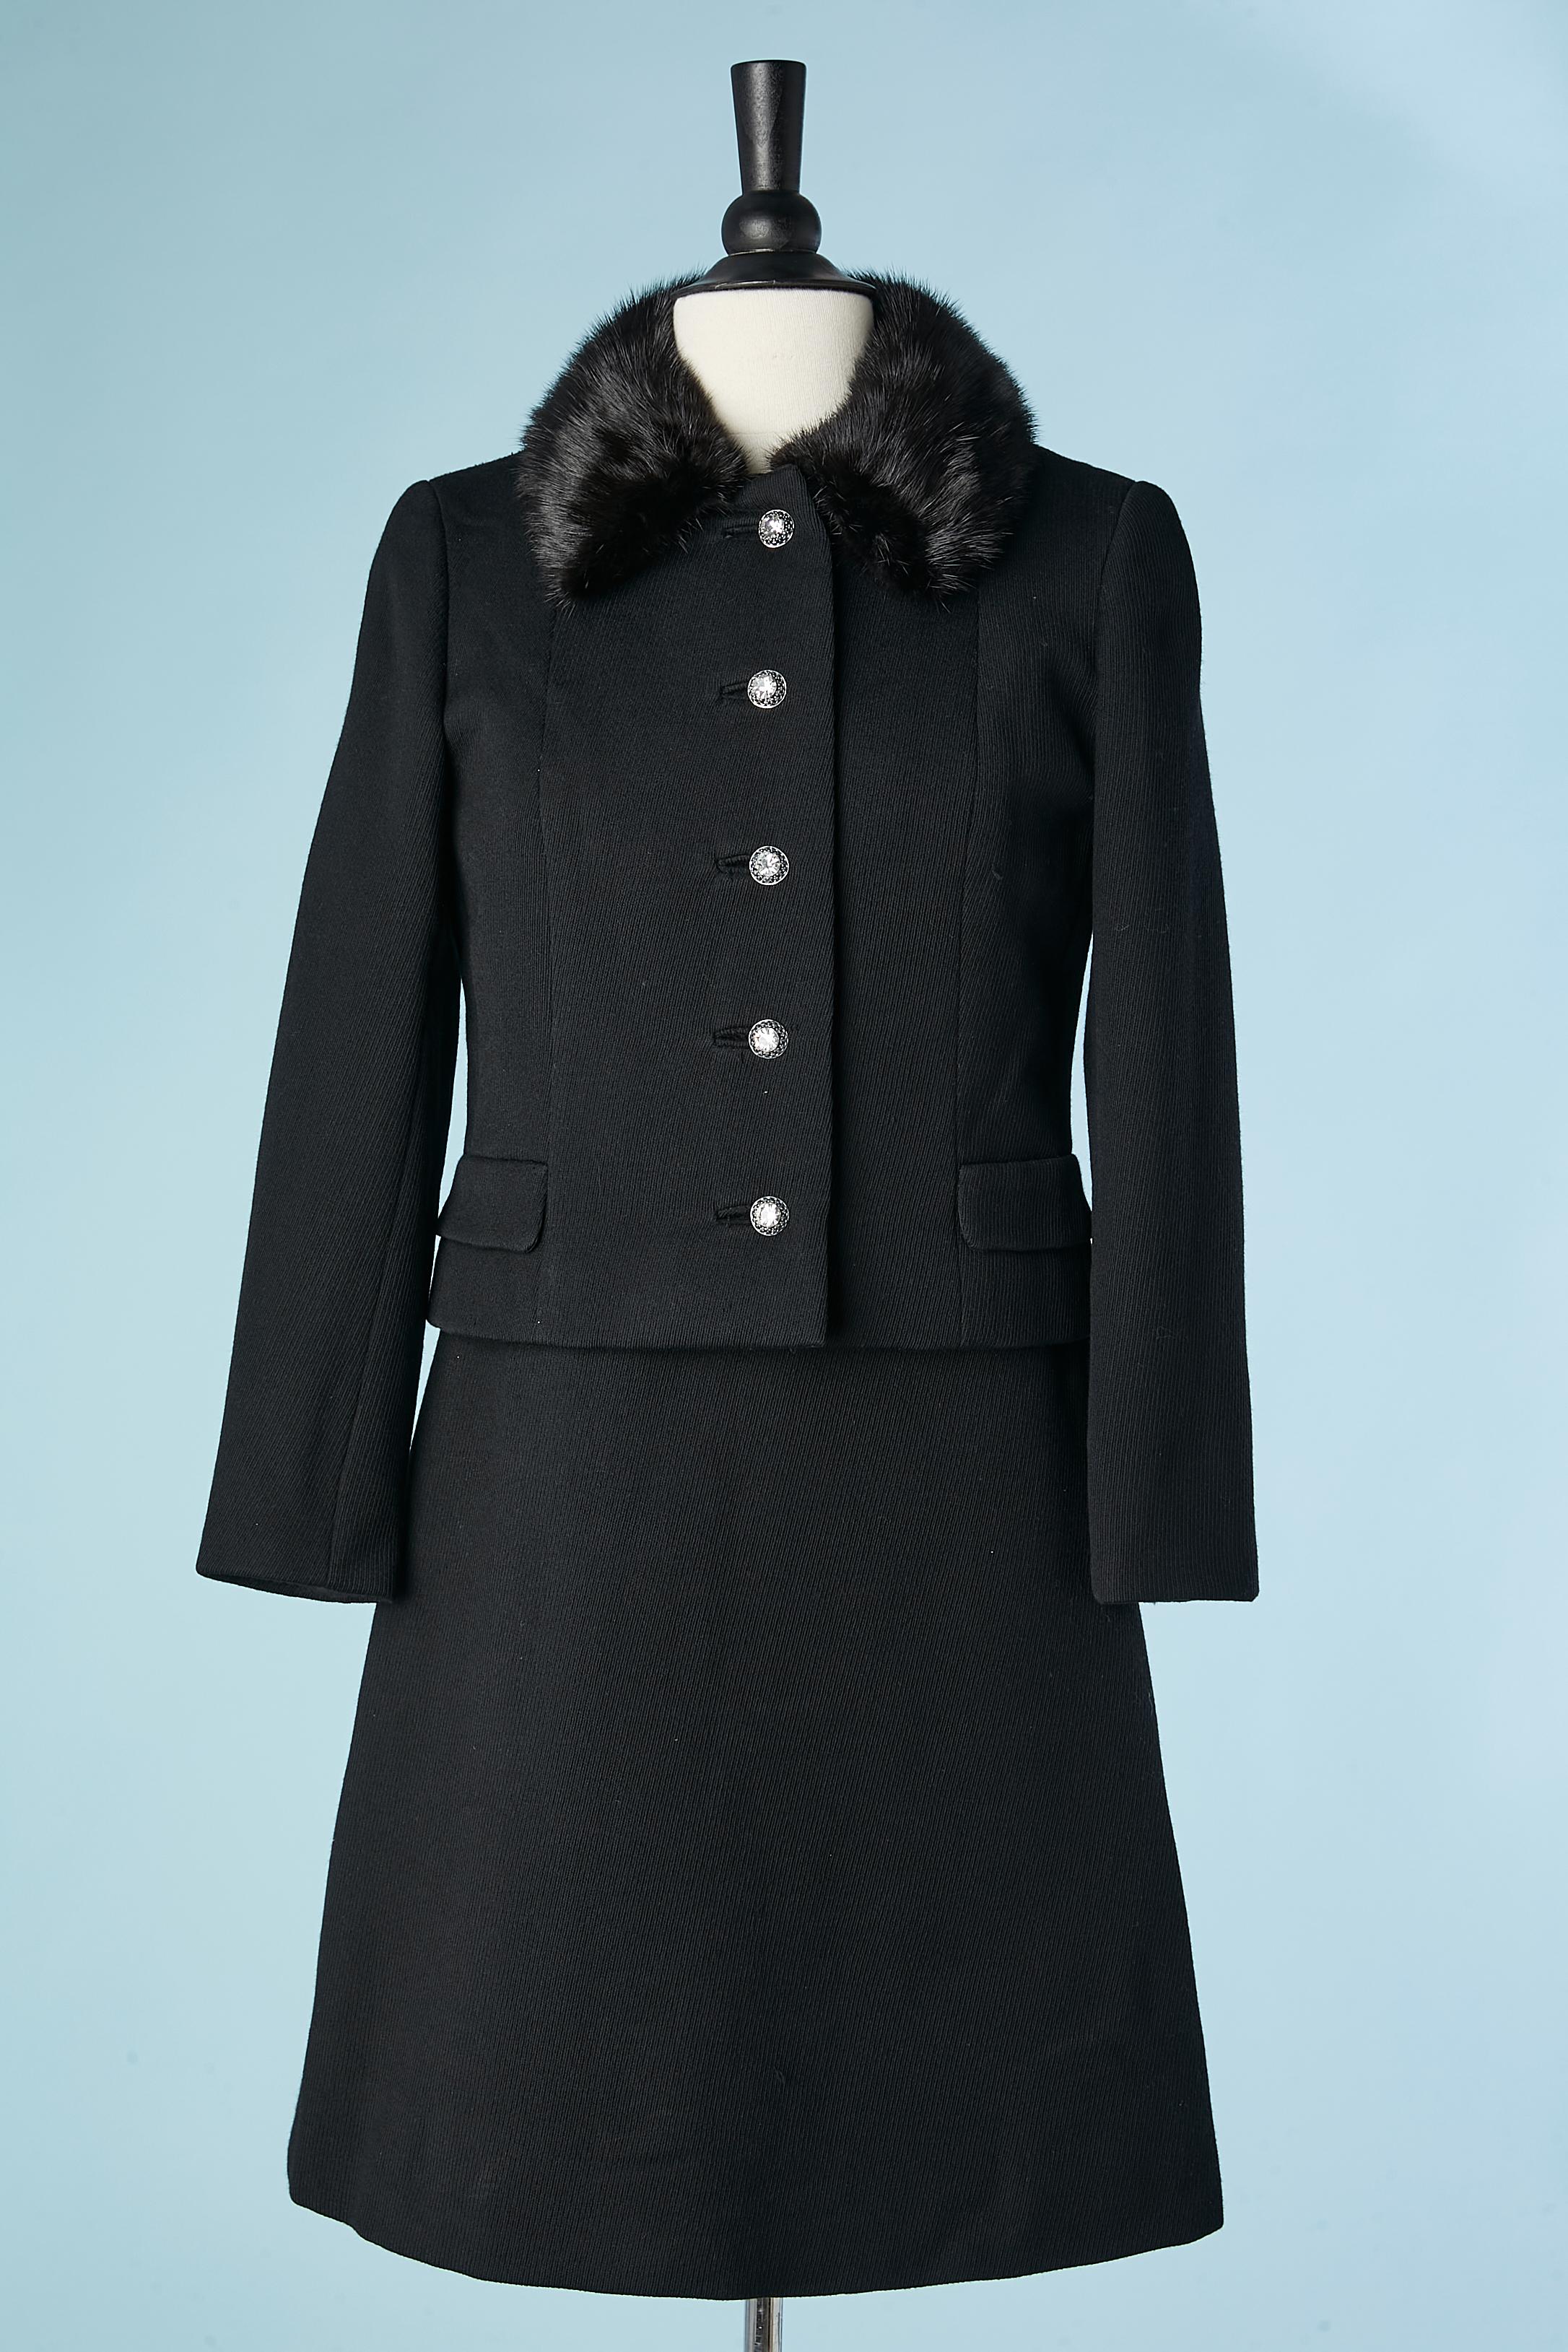 Black wool jacket with mink collar and dress cocktail ensemble. Embroidered collar and middle front on the dress. The jacket's pockets are fake. Zip on the left side. Black passementerie ribbon piping inside. 
SIZE S